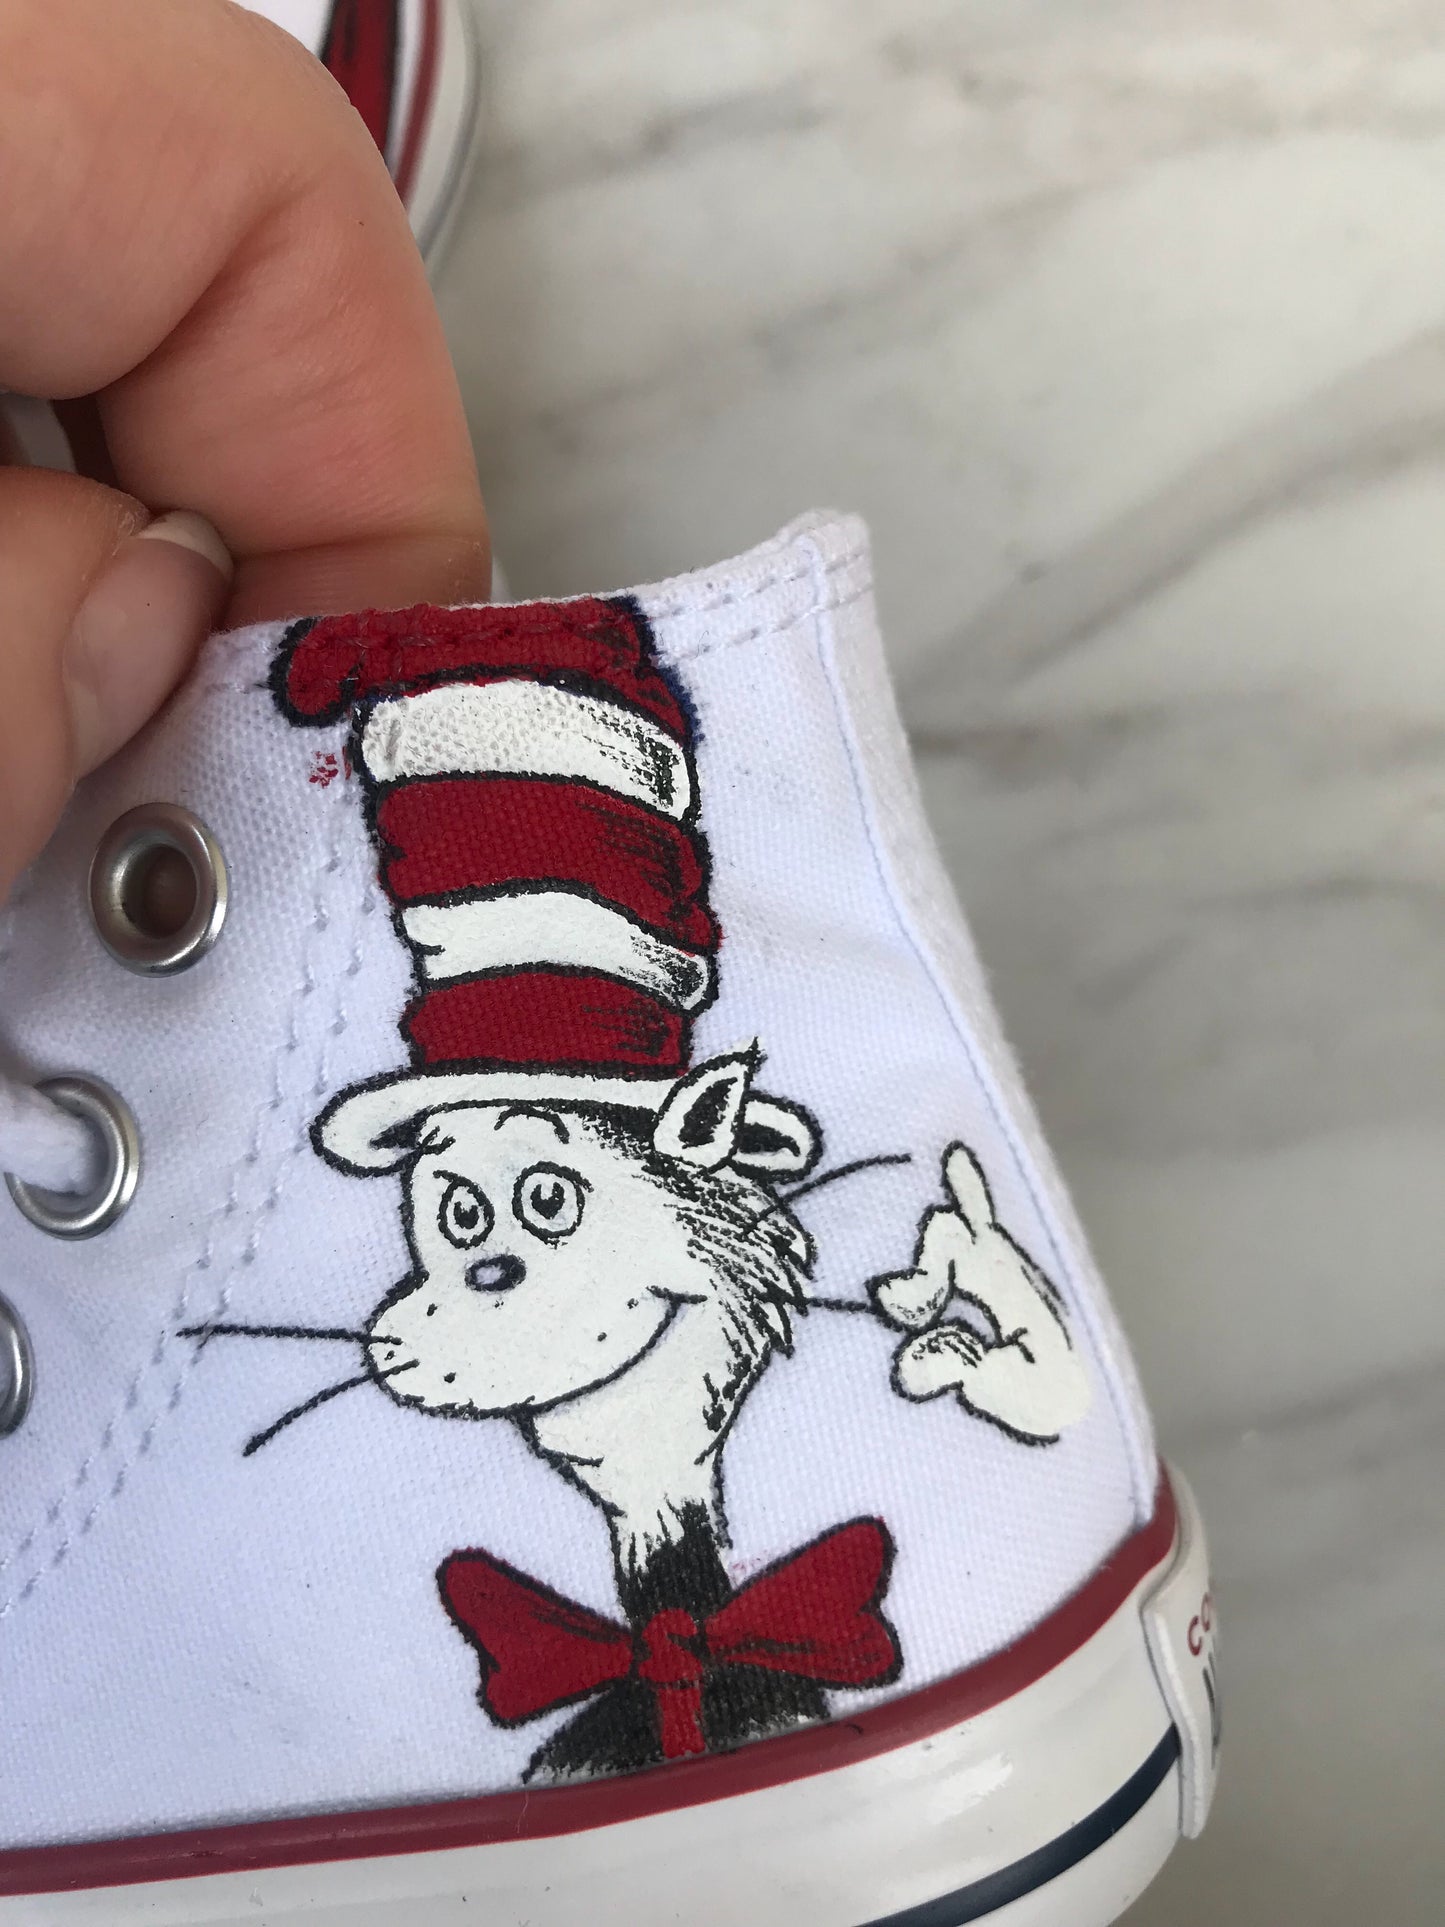 Cat in the Hat Converse Sneakers - Toddler